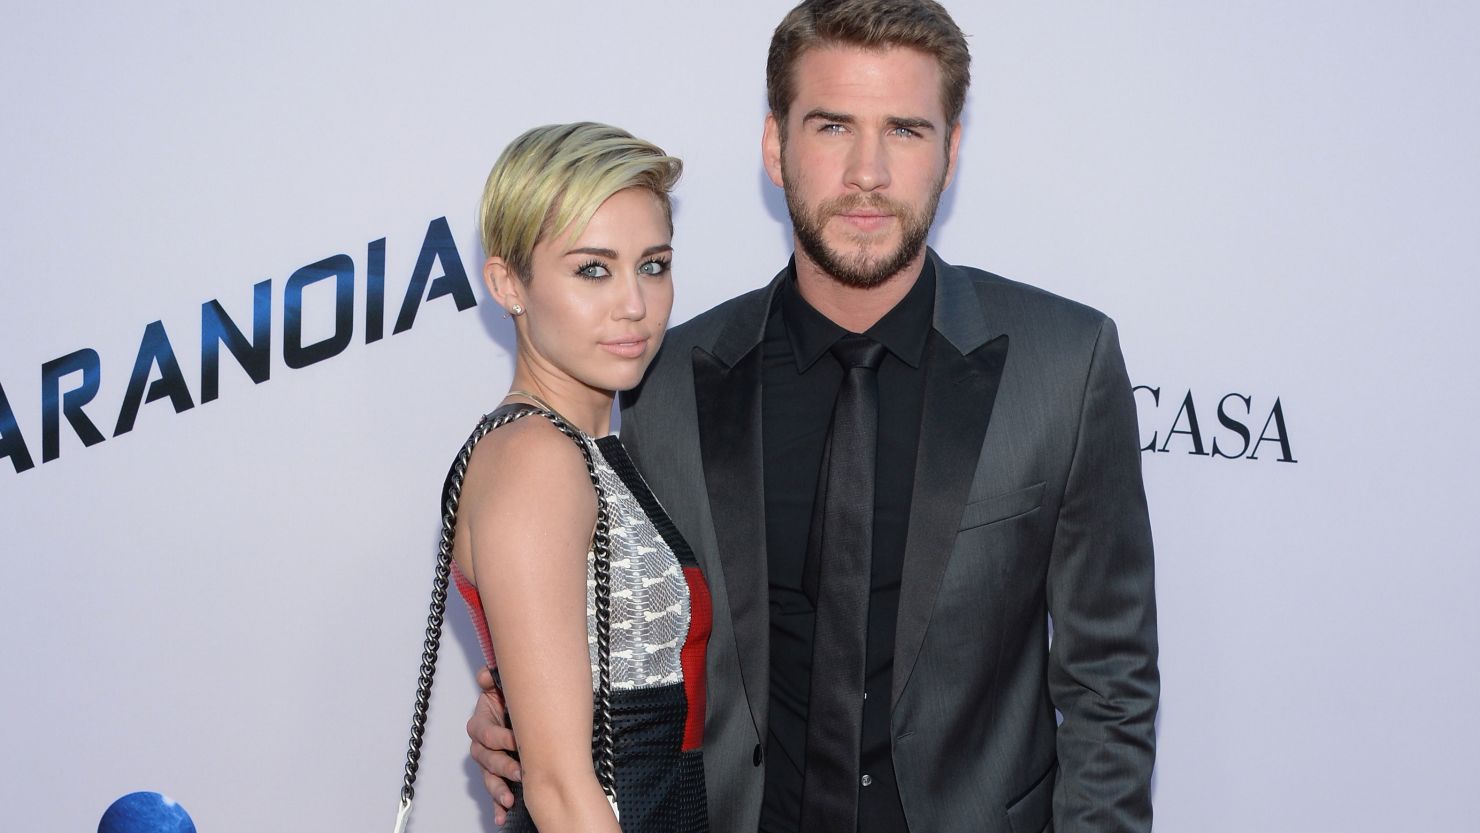 Miley Cyrus and Liam Hemsworth ended their engagement in 2013, but got back together last year. 